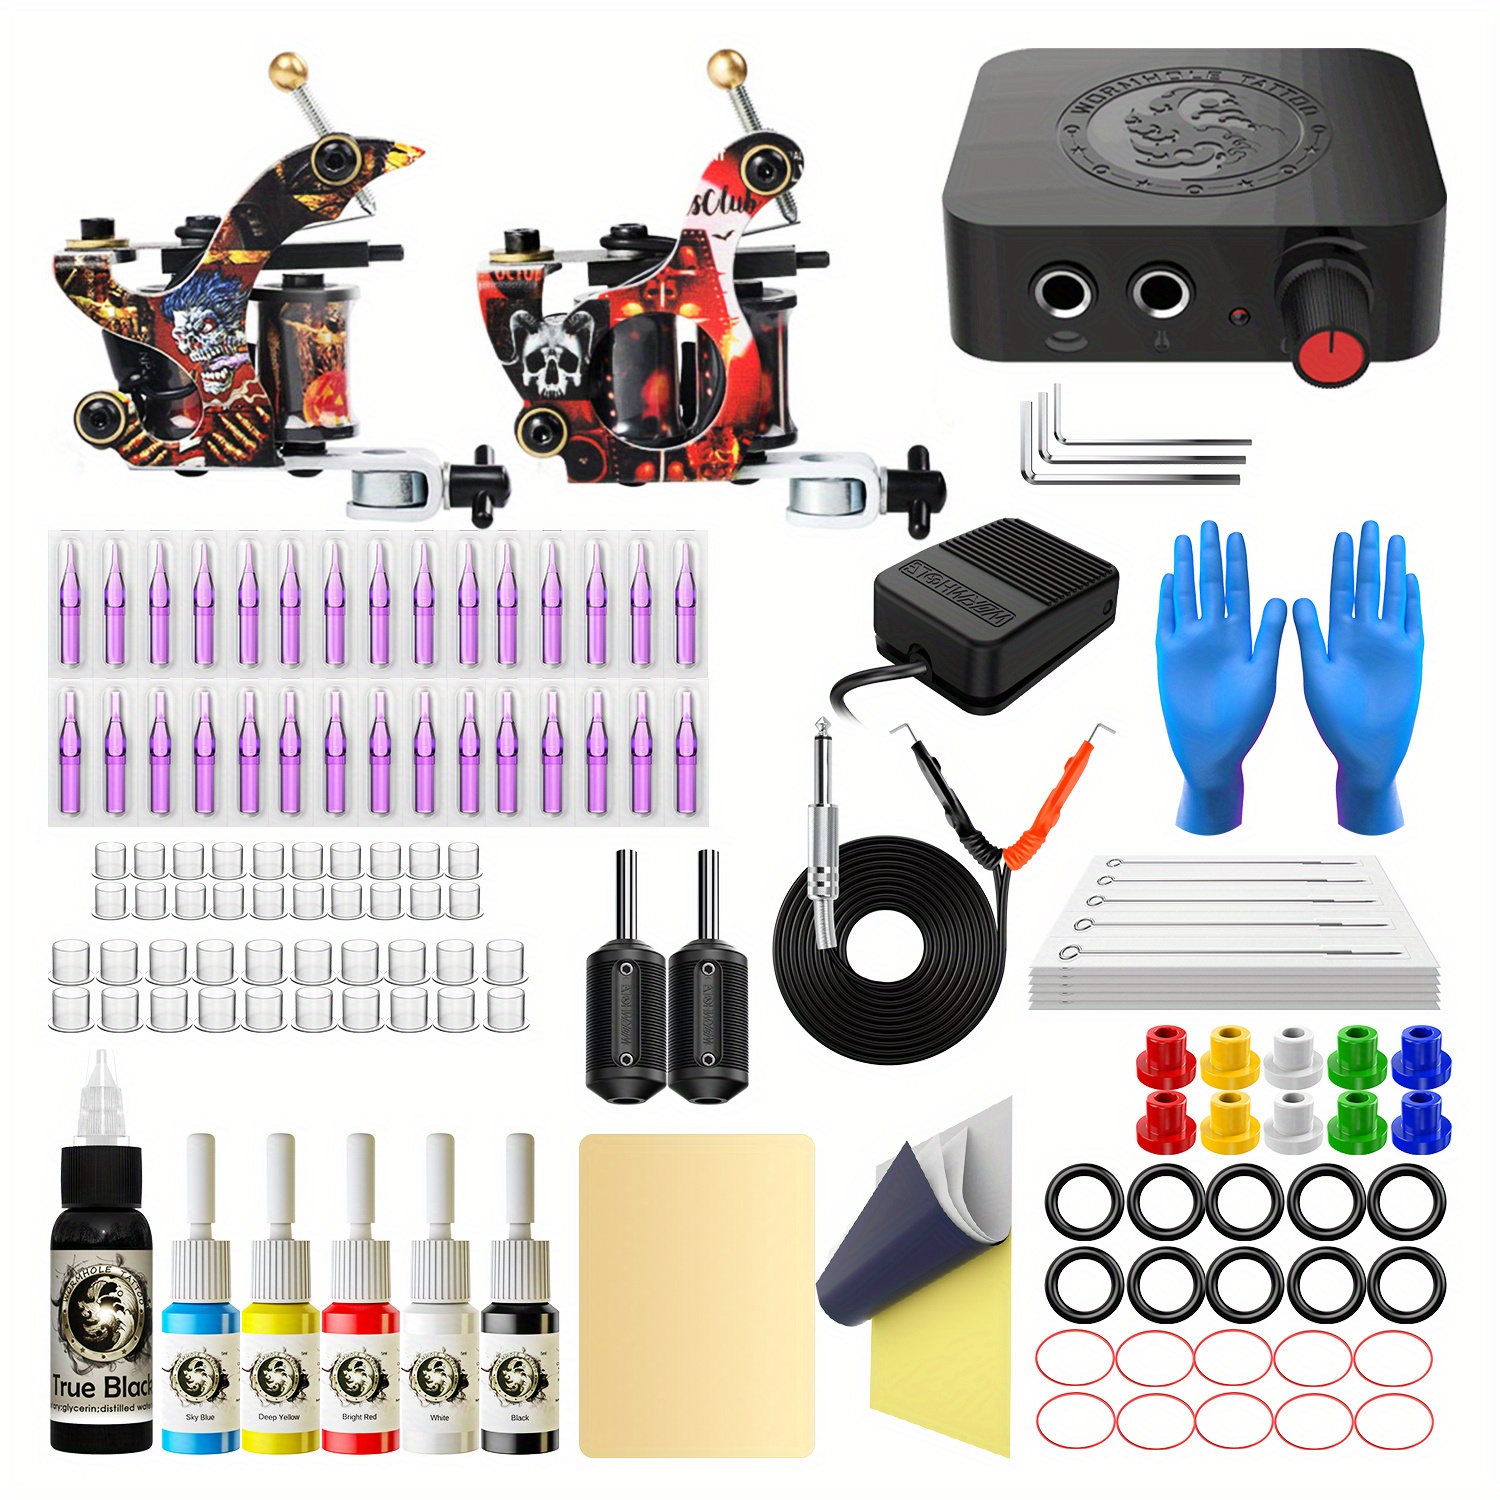 Tattoo Kit, Beoncall Complete Tattoo Kit Set 2 Tattoo Machine with Power  Supply Foot Pedal 20 Tattoo Needles Grips Tips for Shading and Lining  Tattoo